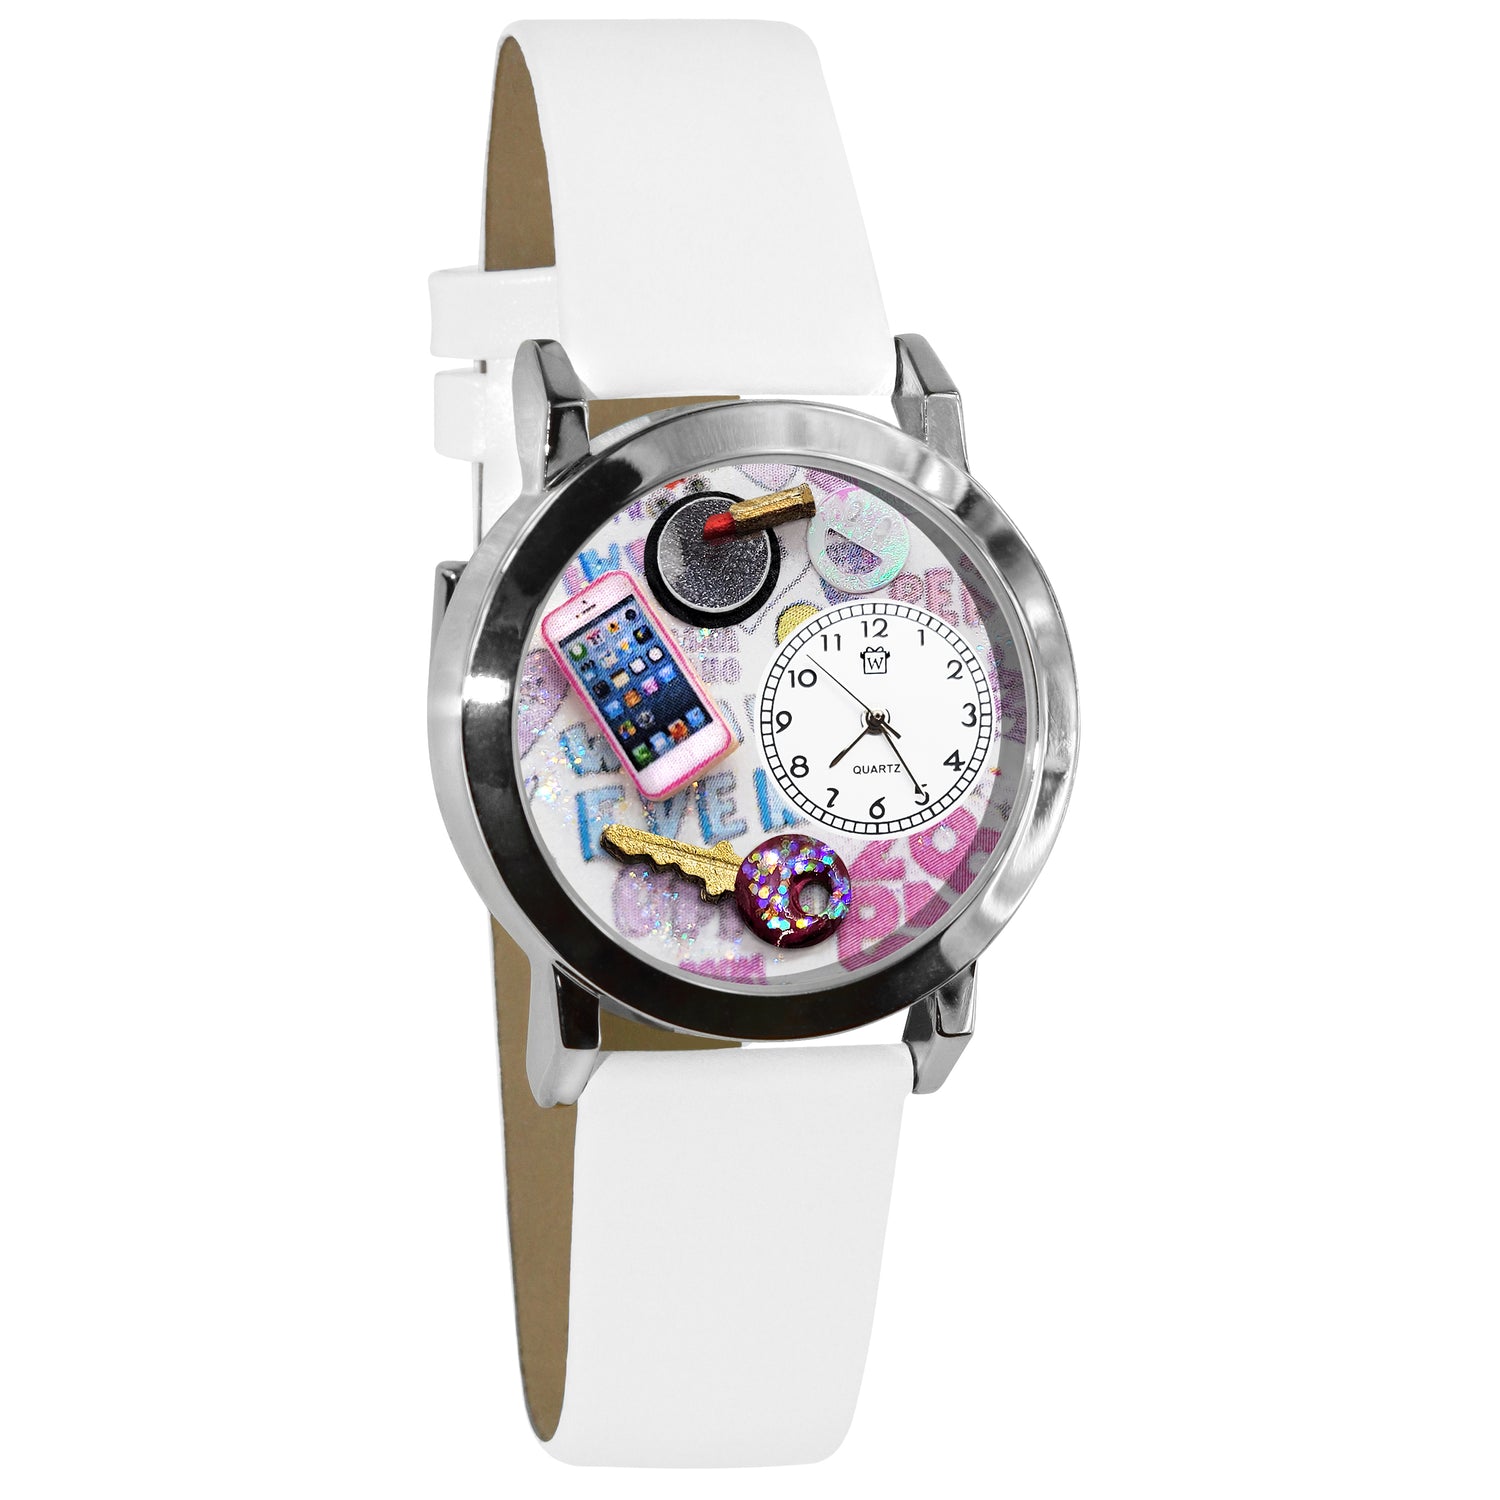 Whimsical Gifts | Teen Girl 3D Watch Small Style | Handmade in USA | Youth Themed | | Novelty Unique Fun Miniatures Gift | Silver Finish White Leather Watch Band